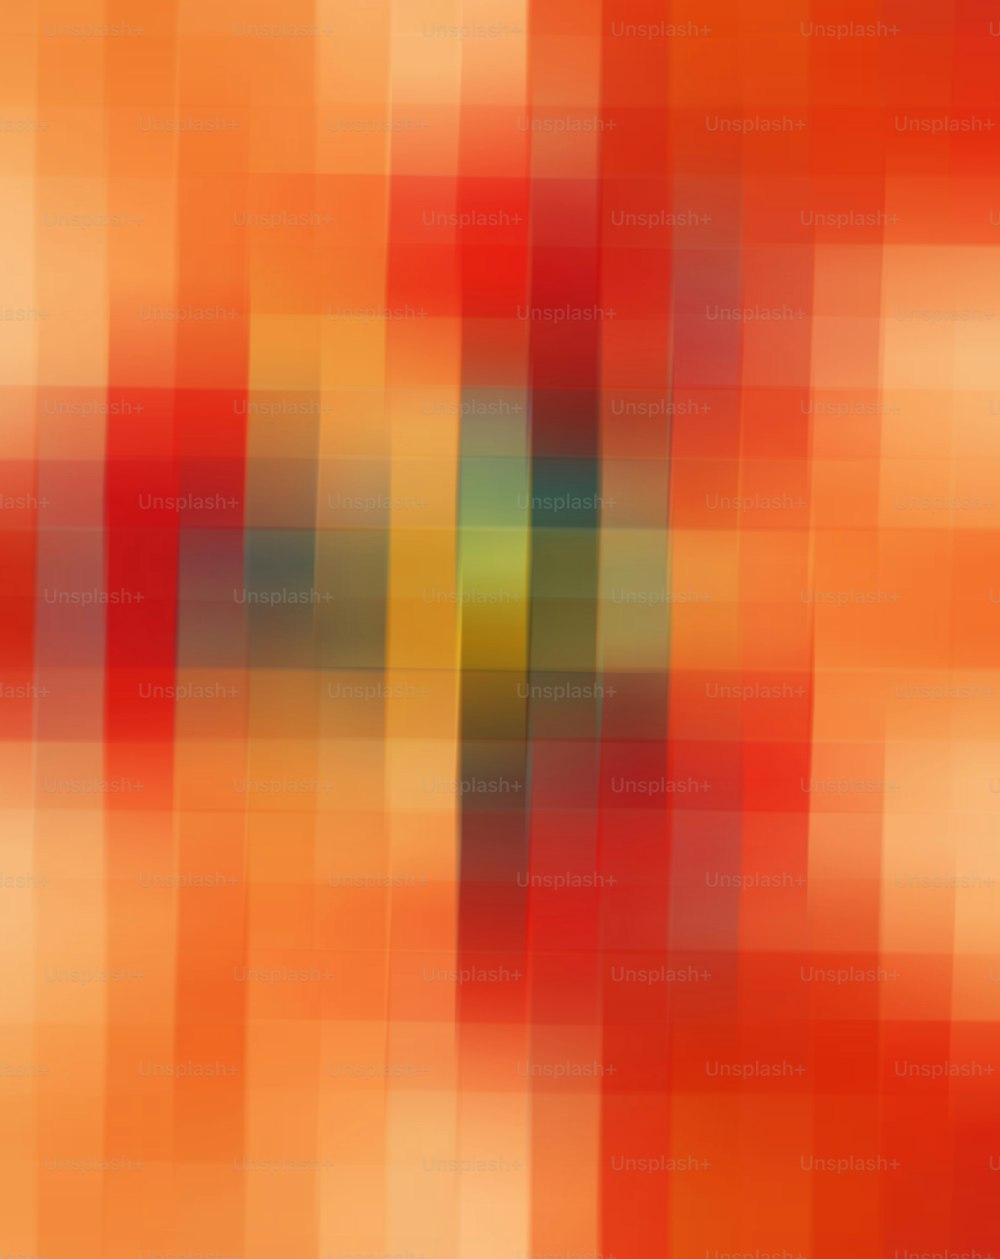 a blurry image of an orange and red background